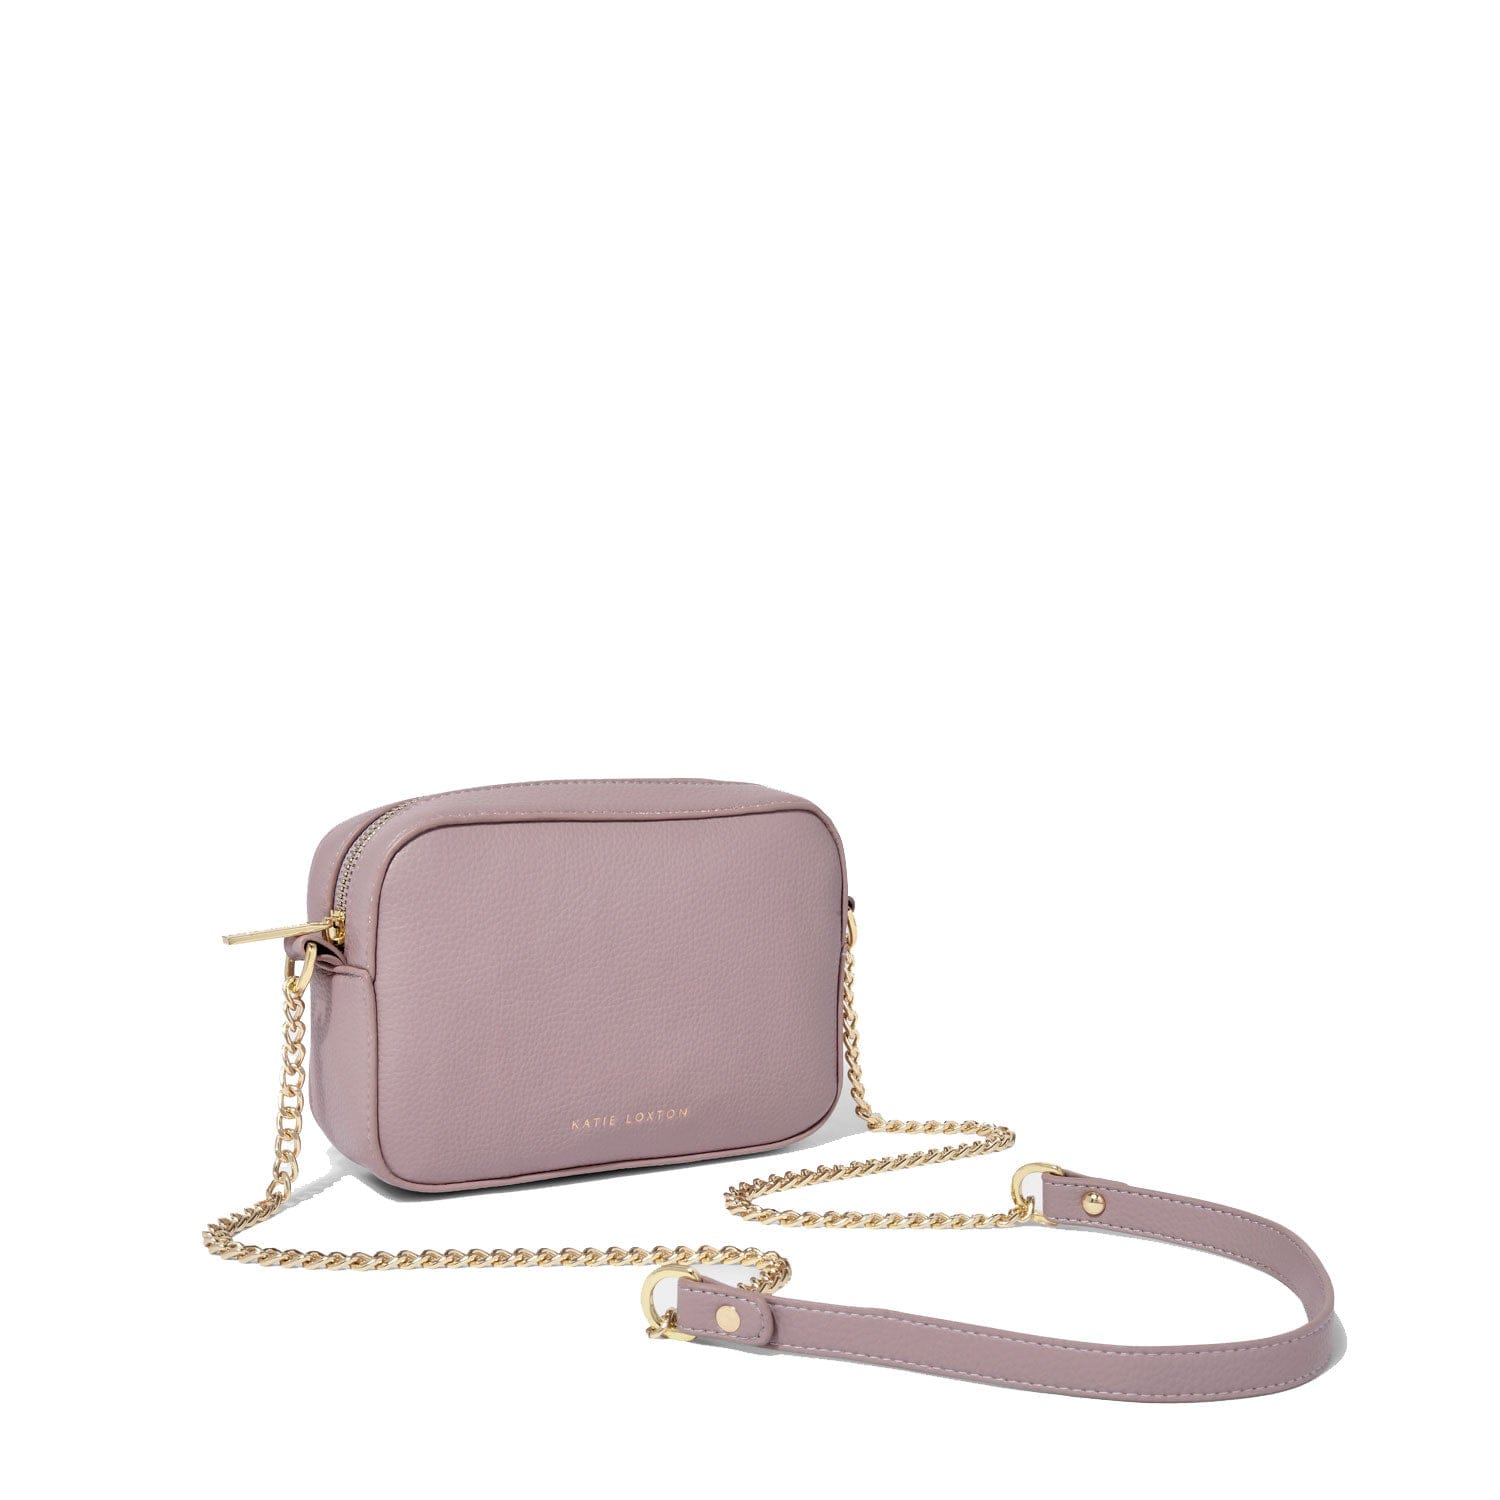 Katie Loxton Crossbody Bag Lilac Katie Loxton Millie Mini Crossbody Bag - Navy / Off White / Olive / Soft Tan / Lilac / Coral